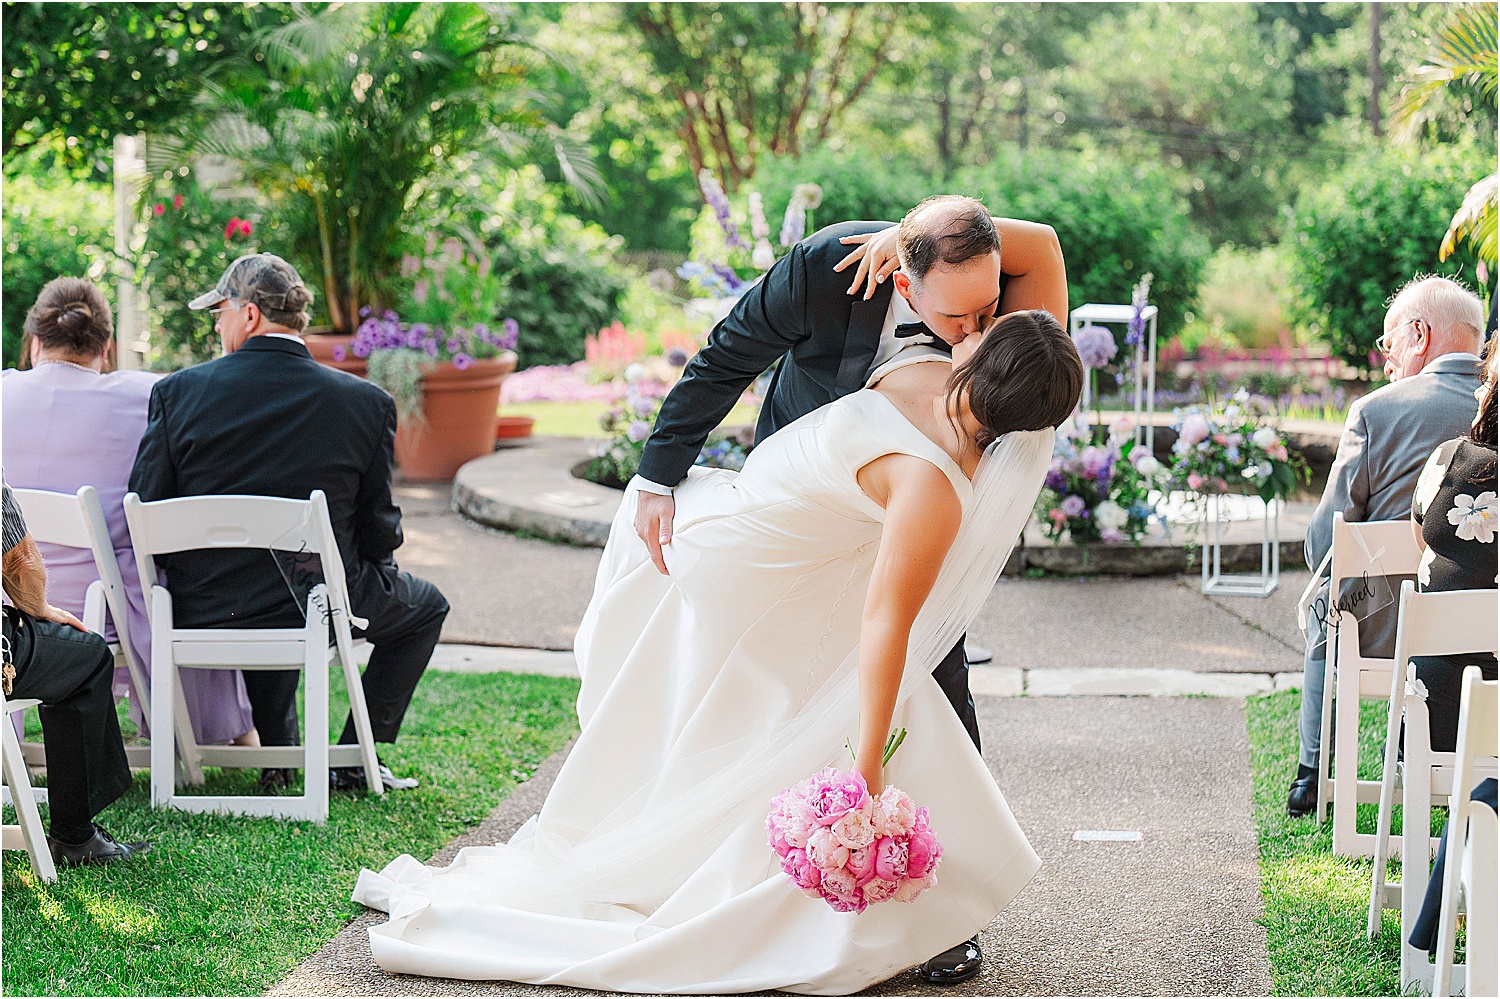 Wedding ceremony dip in the aisle at the end of the ceremony • Wild Weather - Love at a Phipps Conservatory Outdoor Garden Wedding